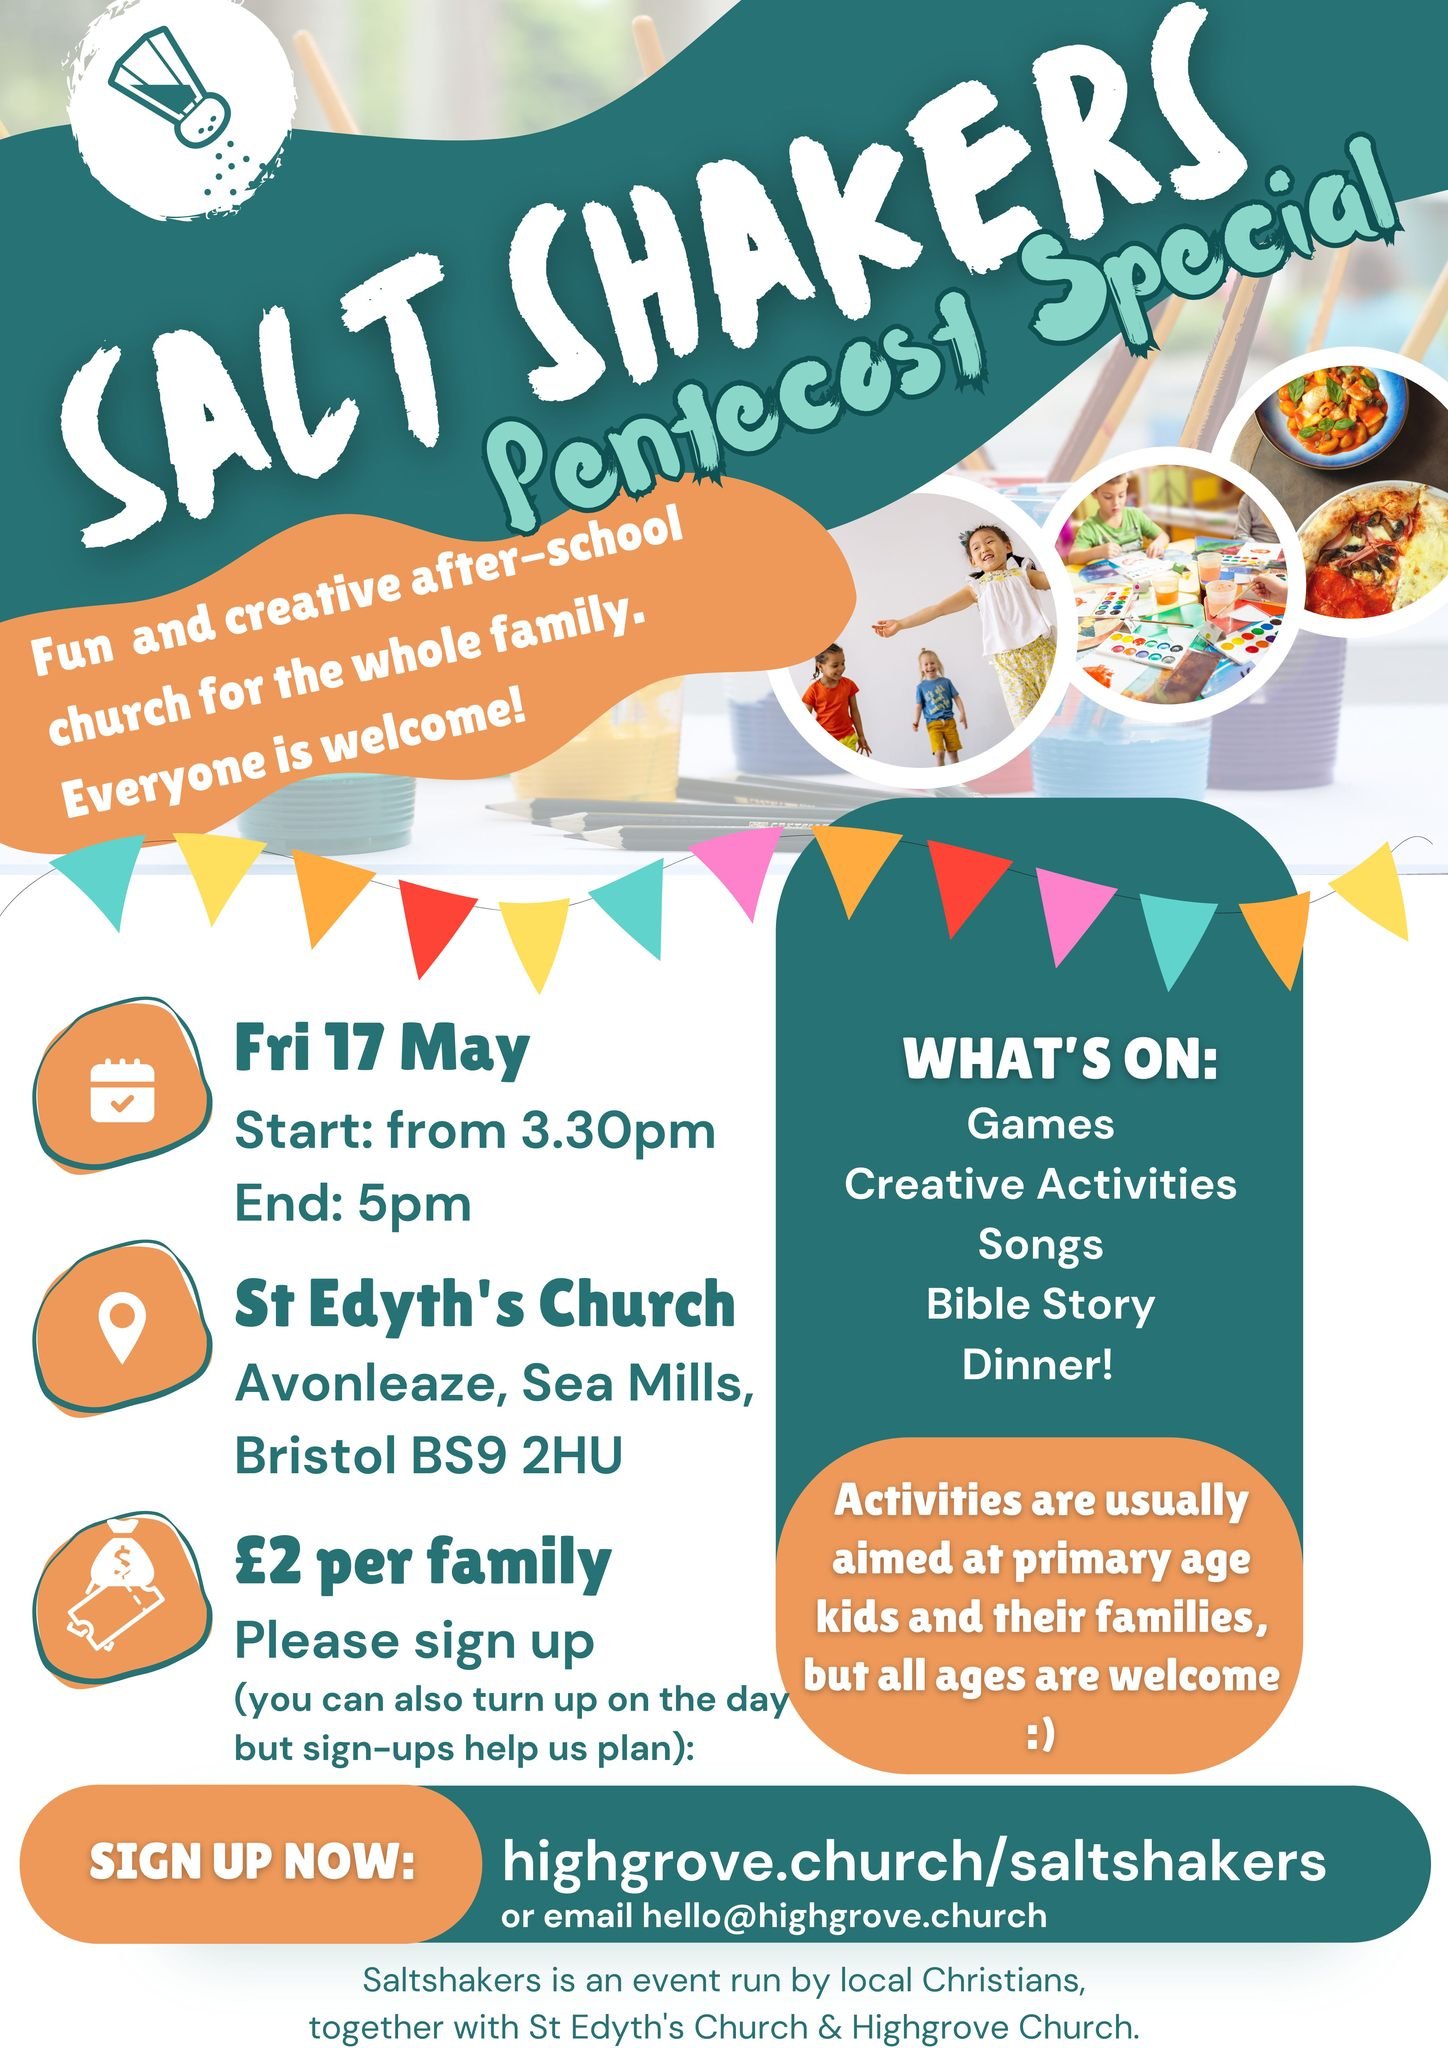 Saltshakers is on this Friday! Come along after school 3:30-5 for fun and games, craft and dinner included! Come join the party! You can book spaces for the children in your care at www.highgrove.church/saltshakers &pound;2 per family. Salt shakers e